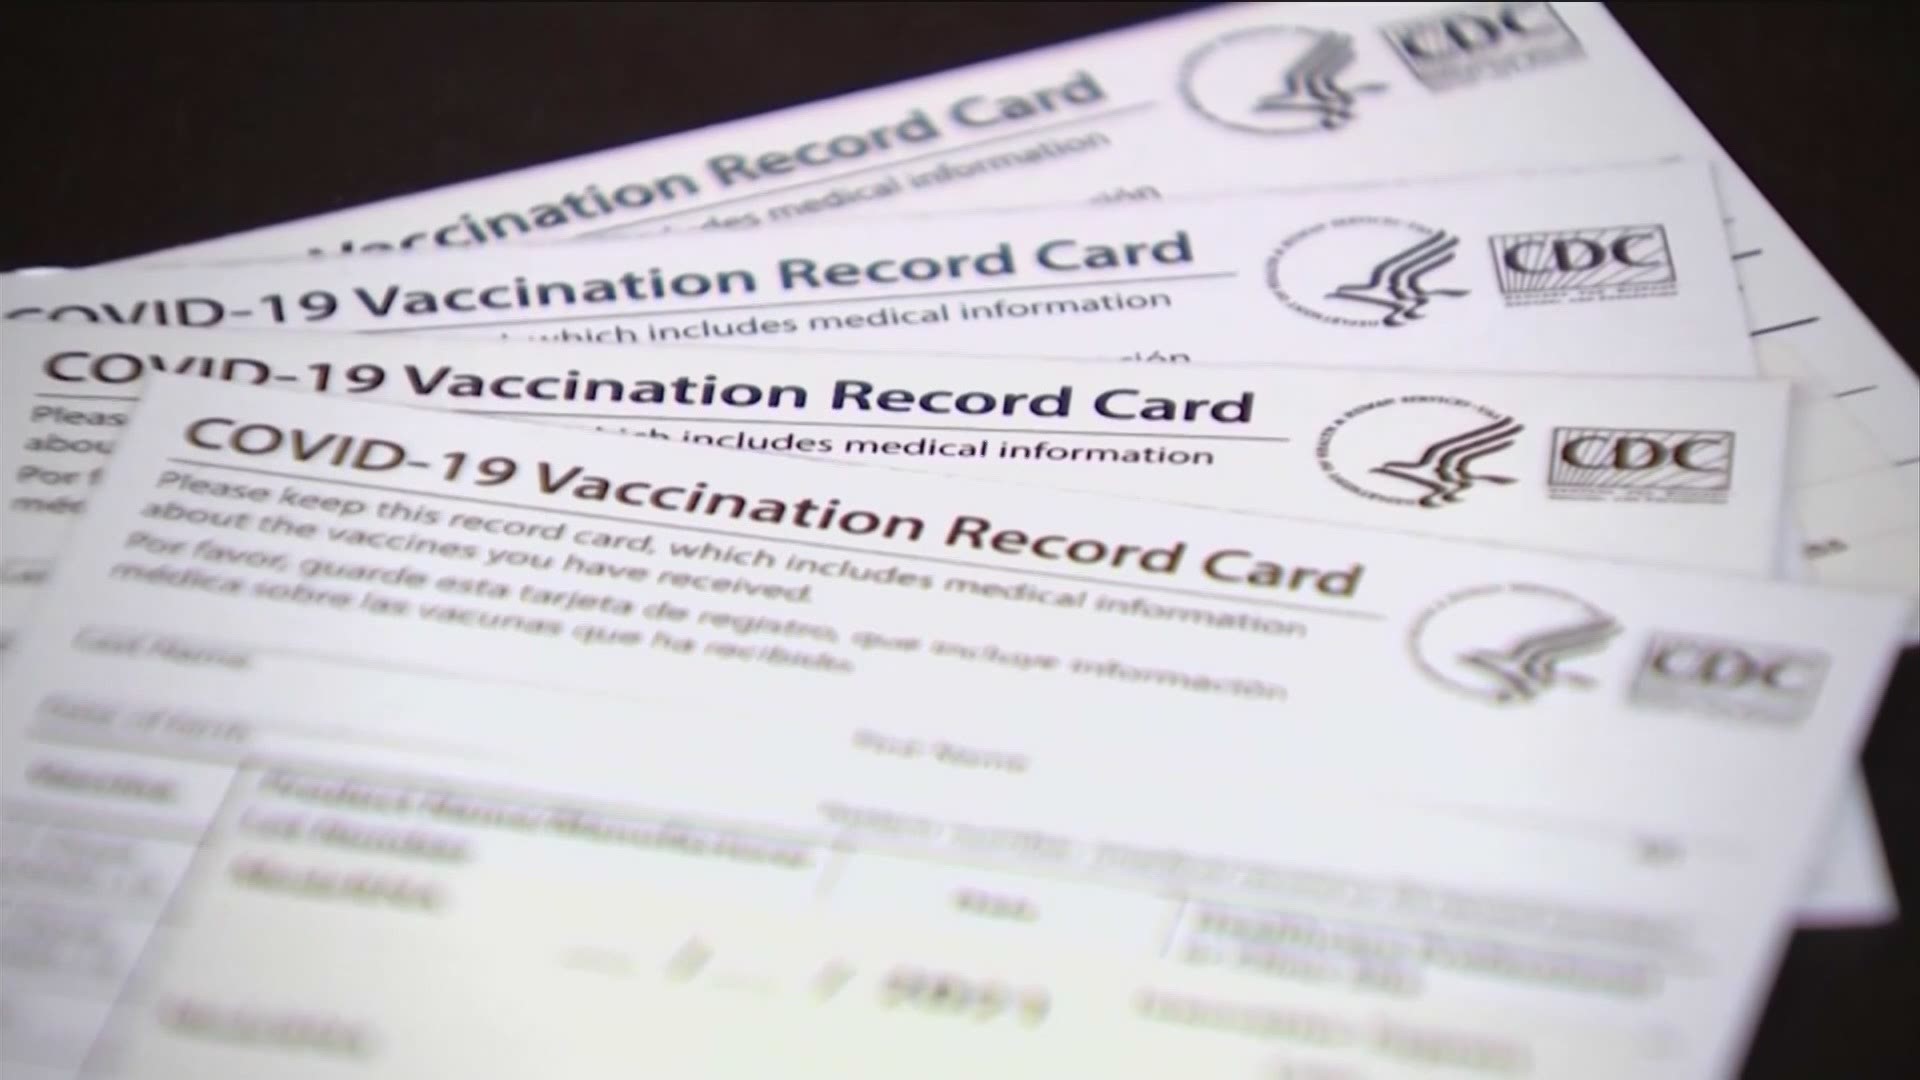 As states and countries continue to reopen, proof of vaccinations may become more common. Vaccine passports may be required in some situations.